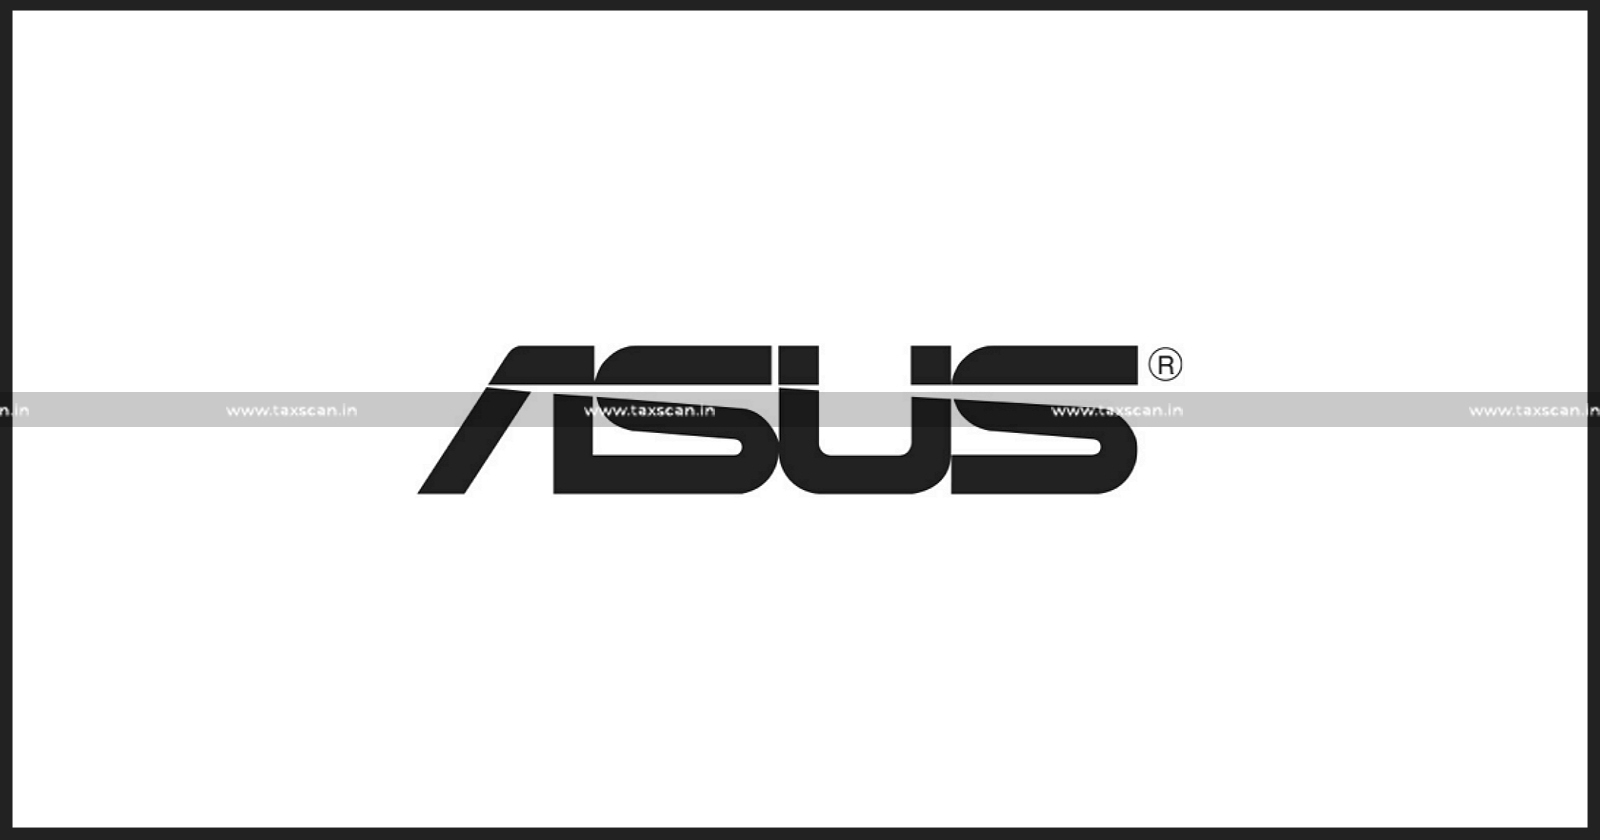 Relief to Asus India - Asus India - CESTAT rules Computer System Desktops - CESTAT - Automatic Data Processing Machines - Taxscan